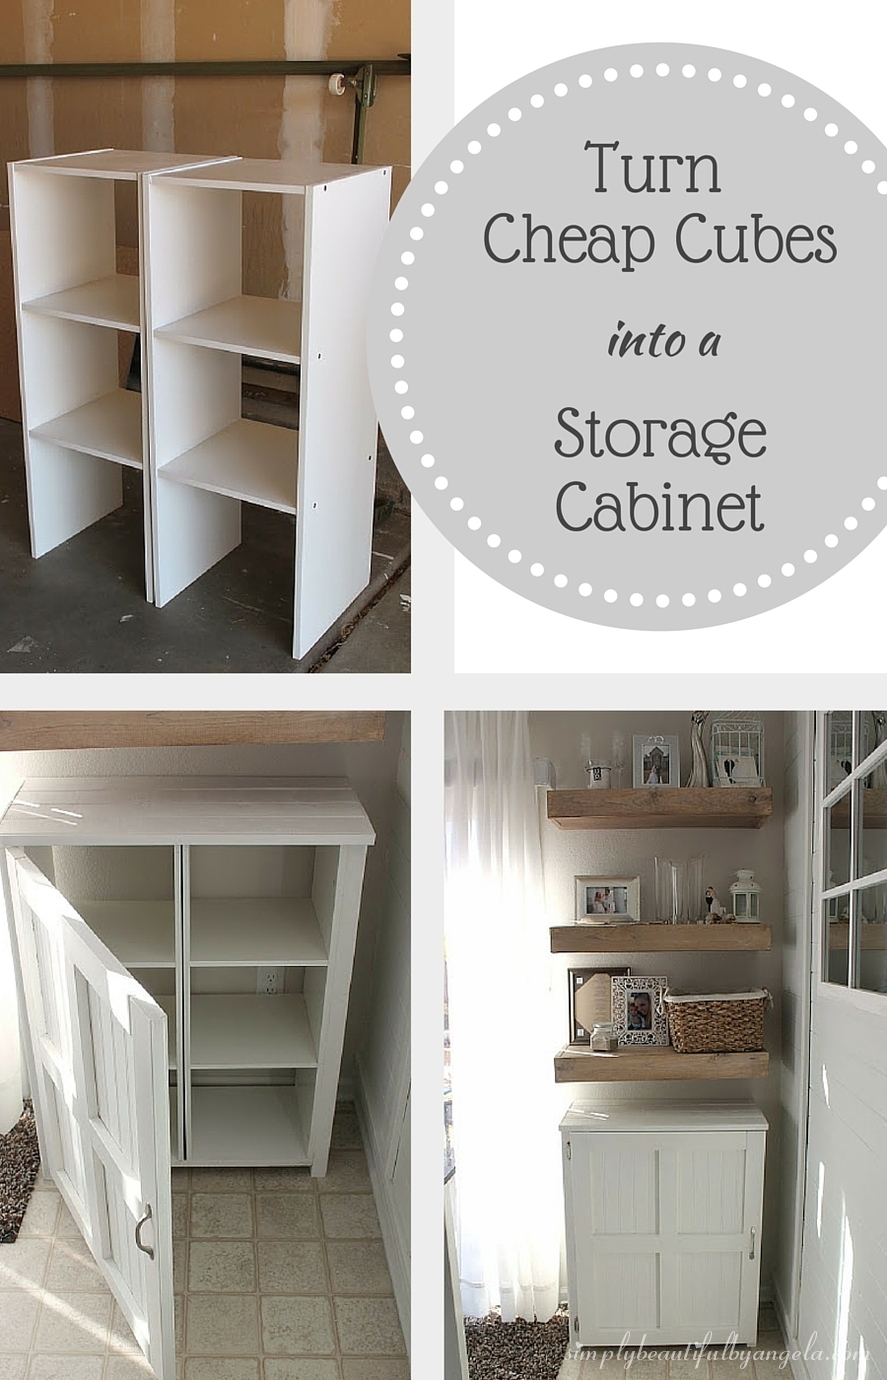 Diy Storage Cabinet Using Cheap Cube Units Simply Beautiful By Angela